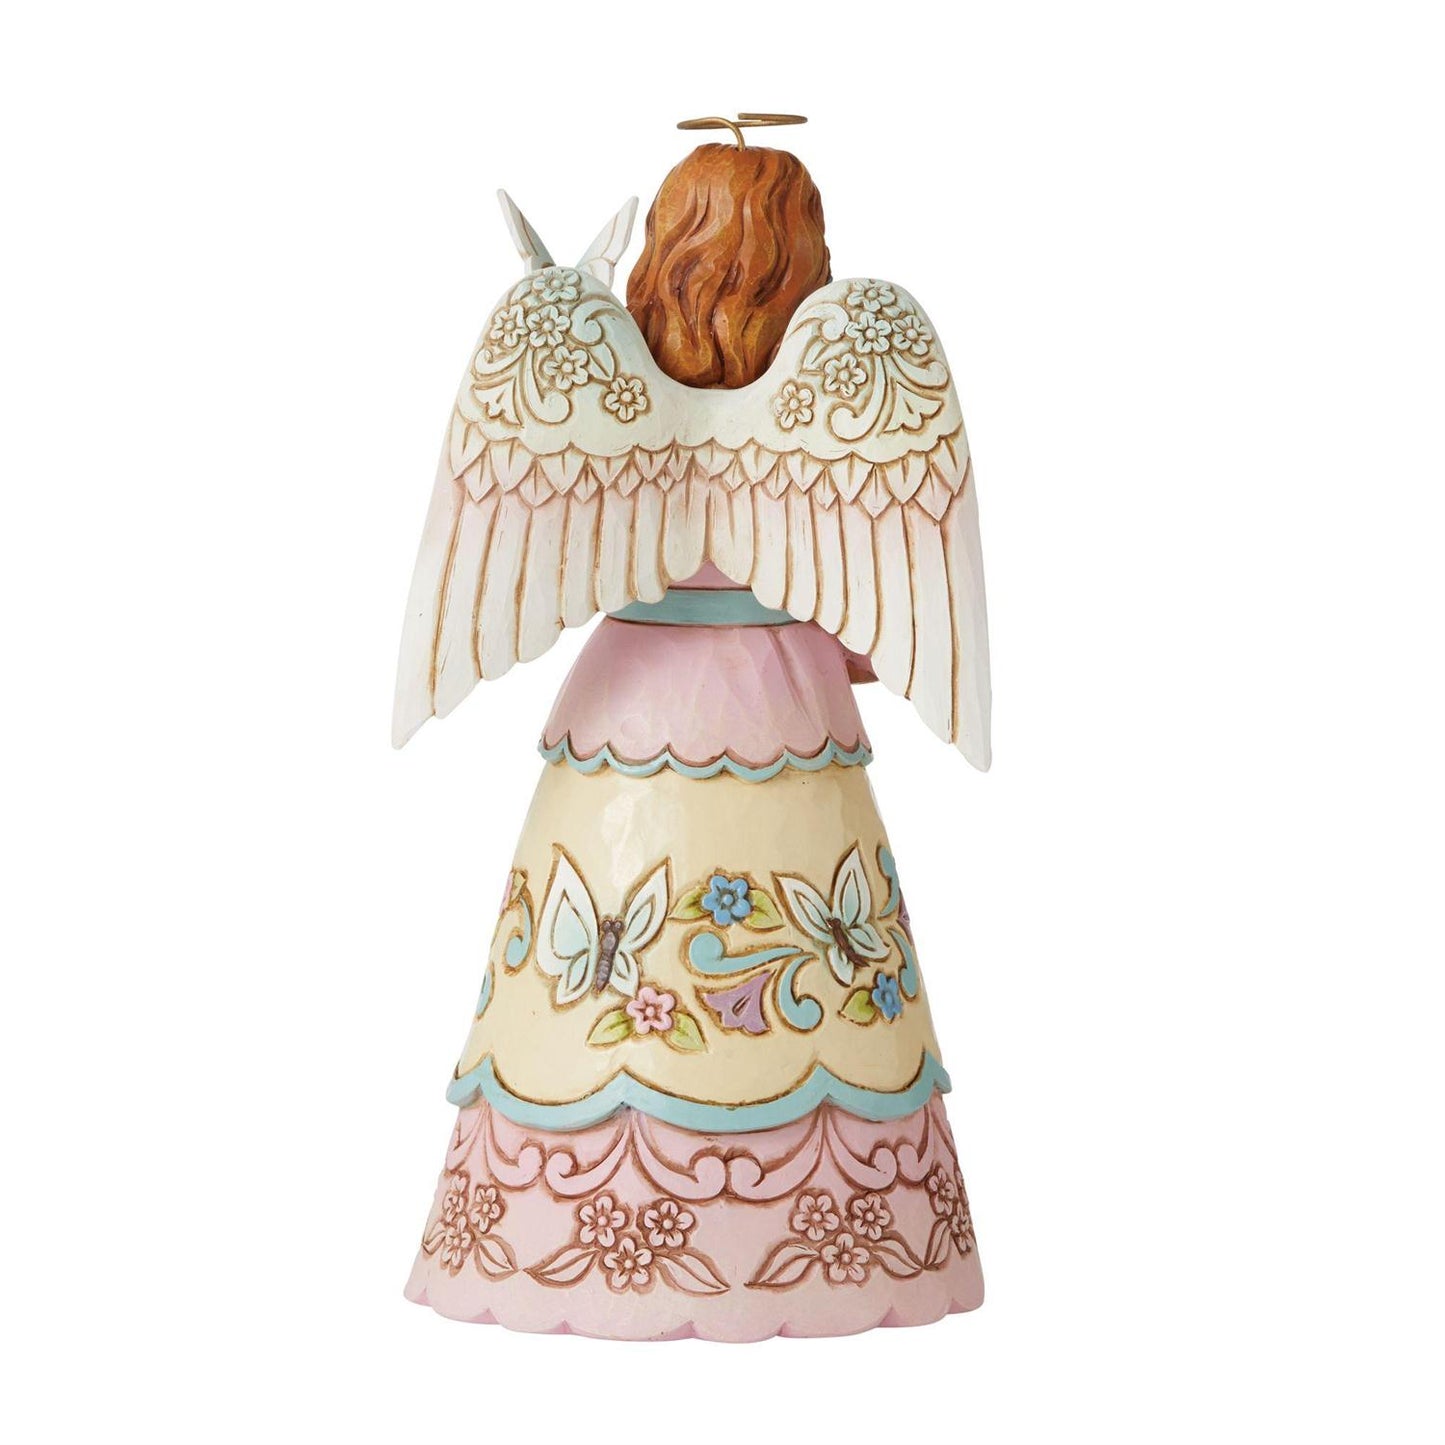 Jim Shore Easter Angel with Butterfly Figurine